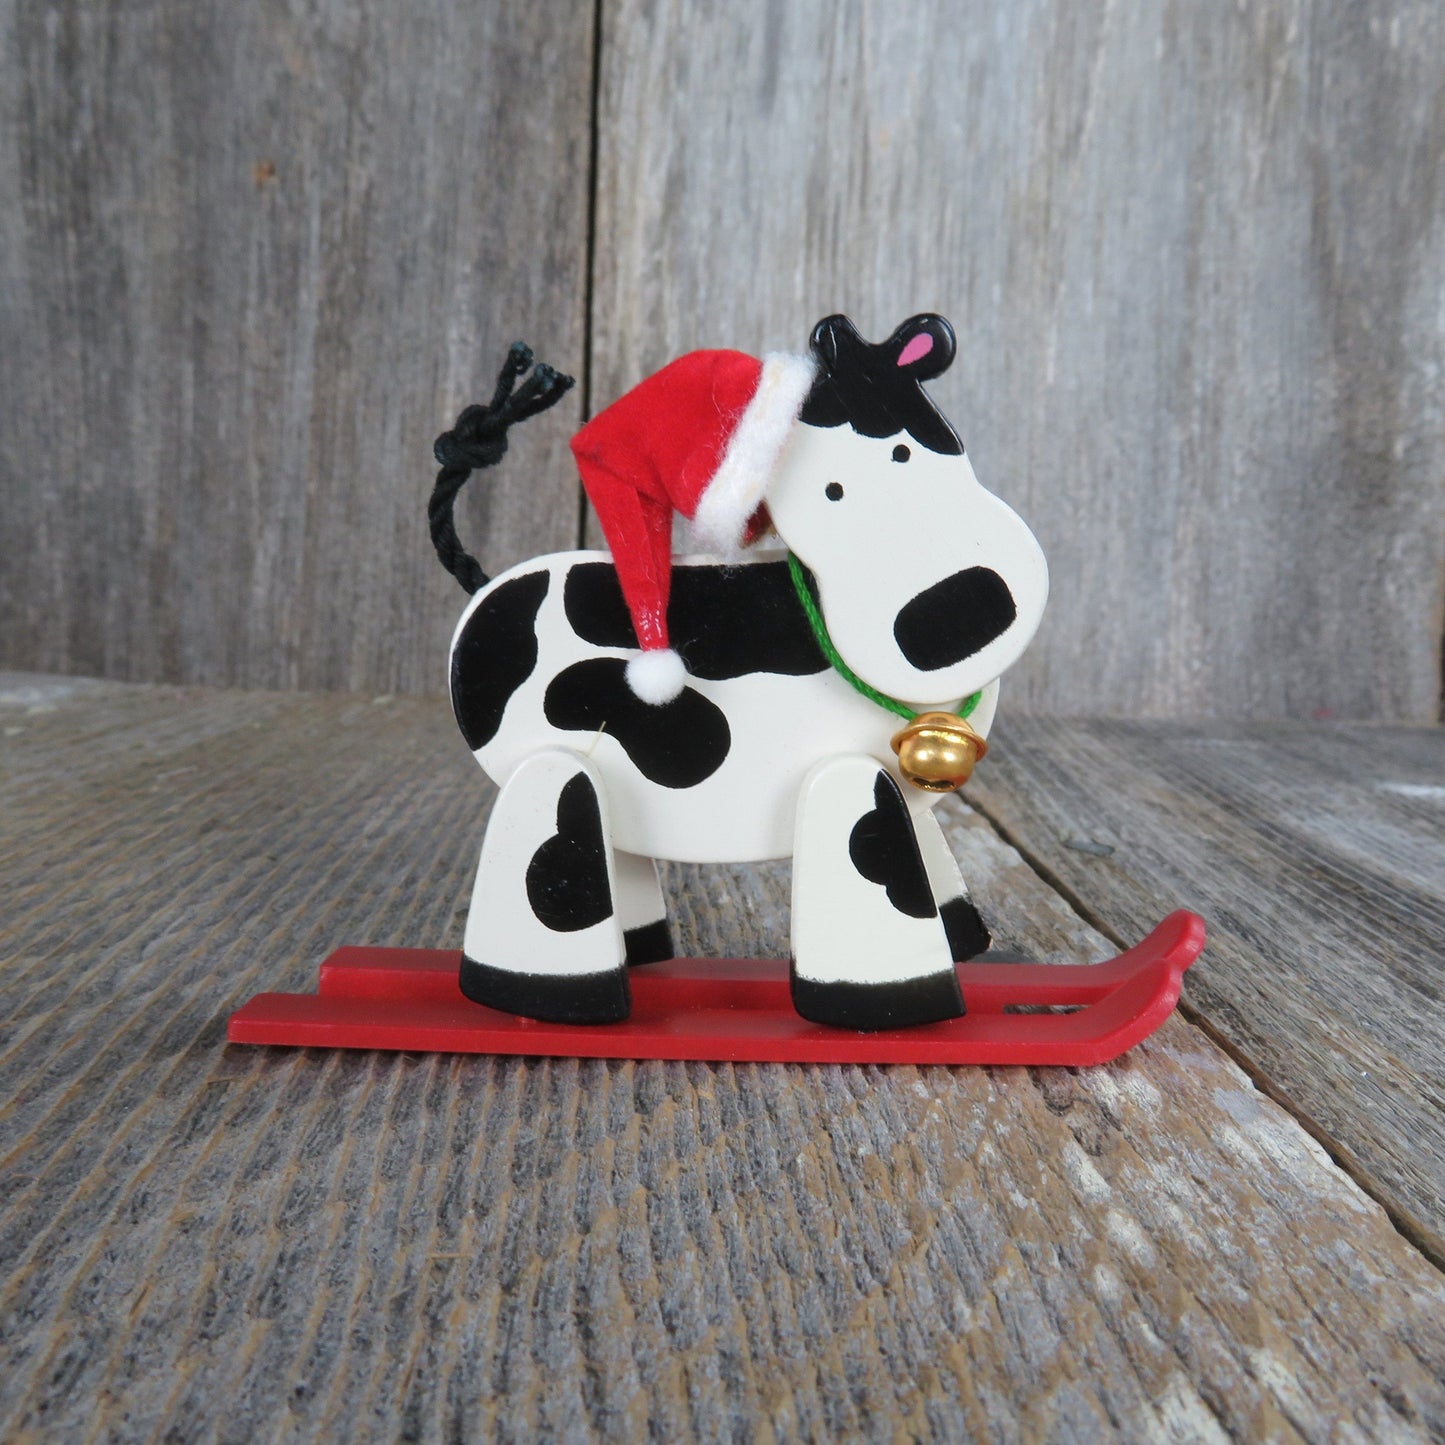 Vintage Cow On Skis Ornament Wooden Avon Christmas Holstein Black White Red Santa Hat Wood Country Rustic